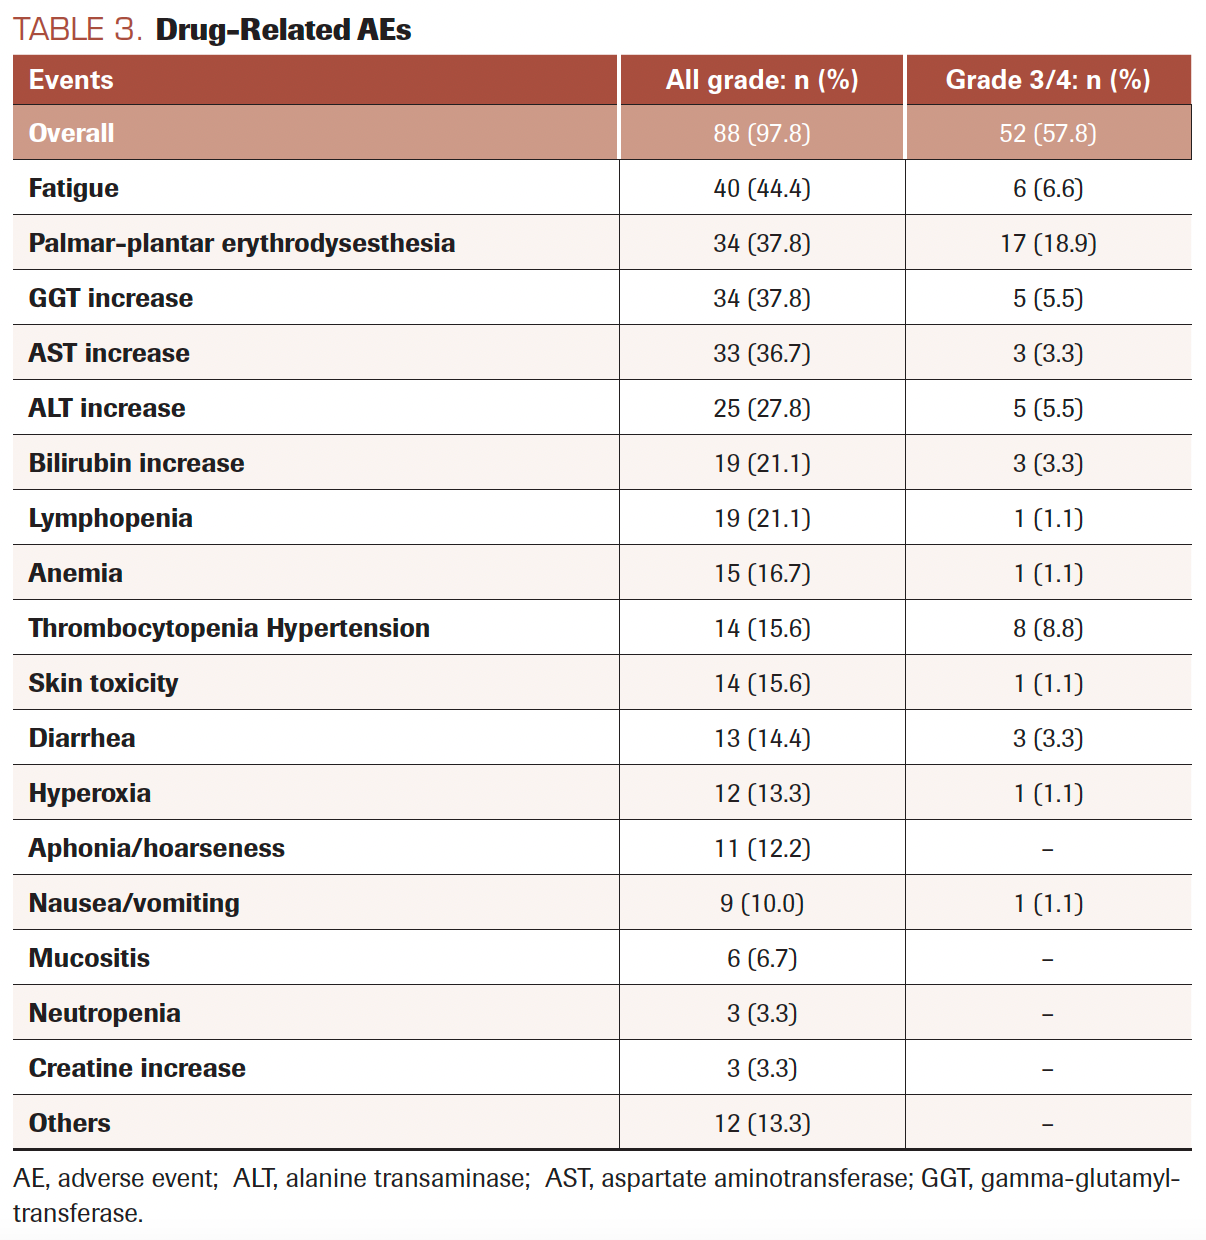 TABLE 3. Drug-Related AEs